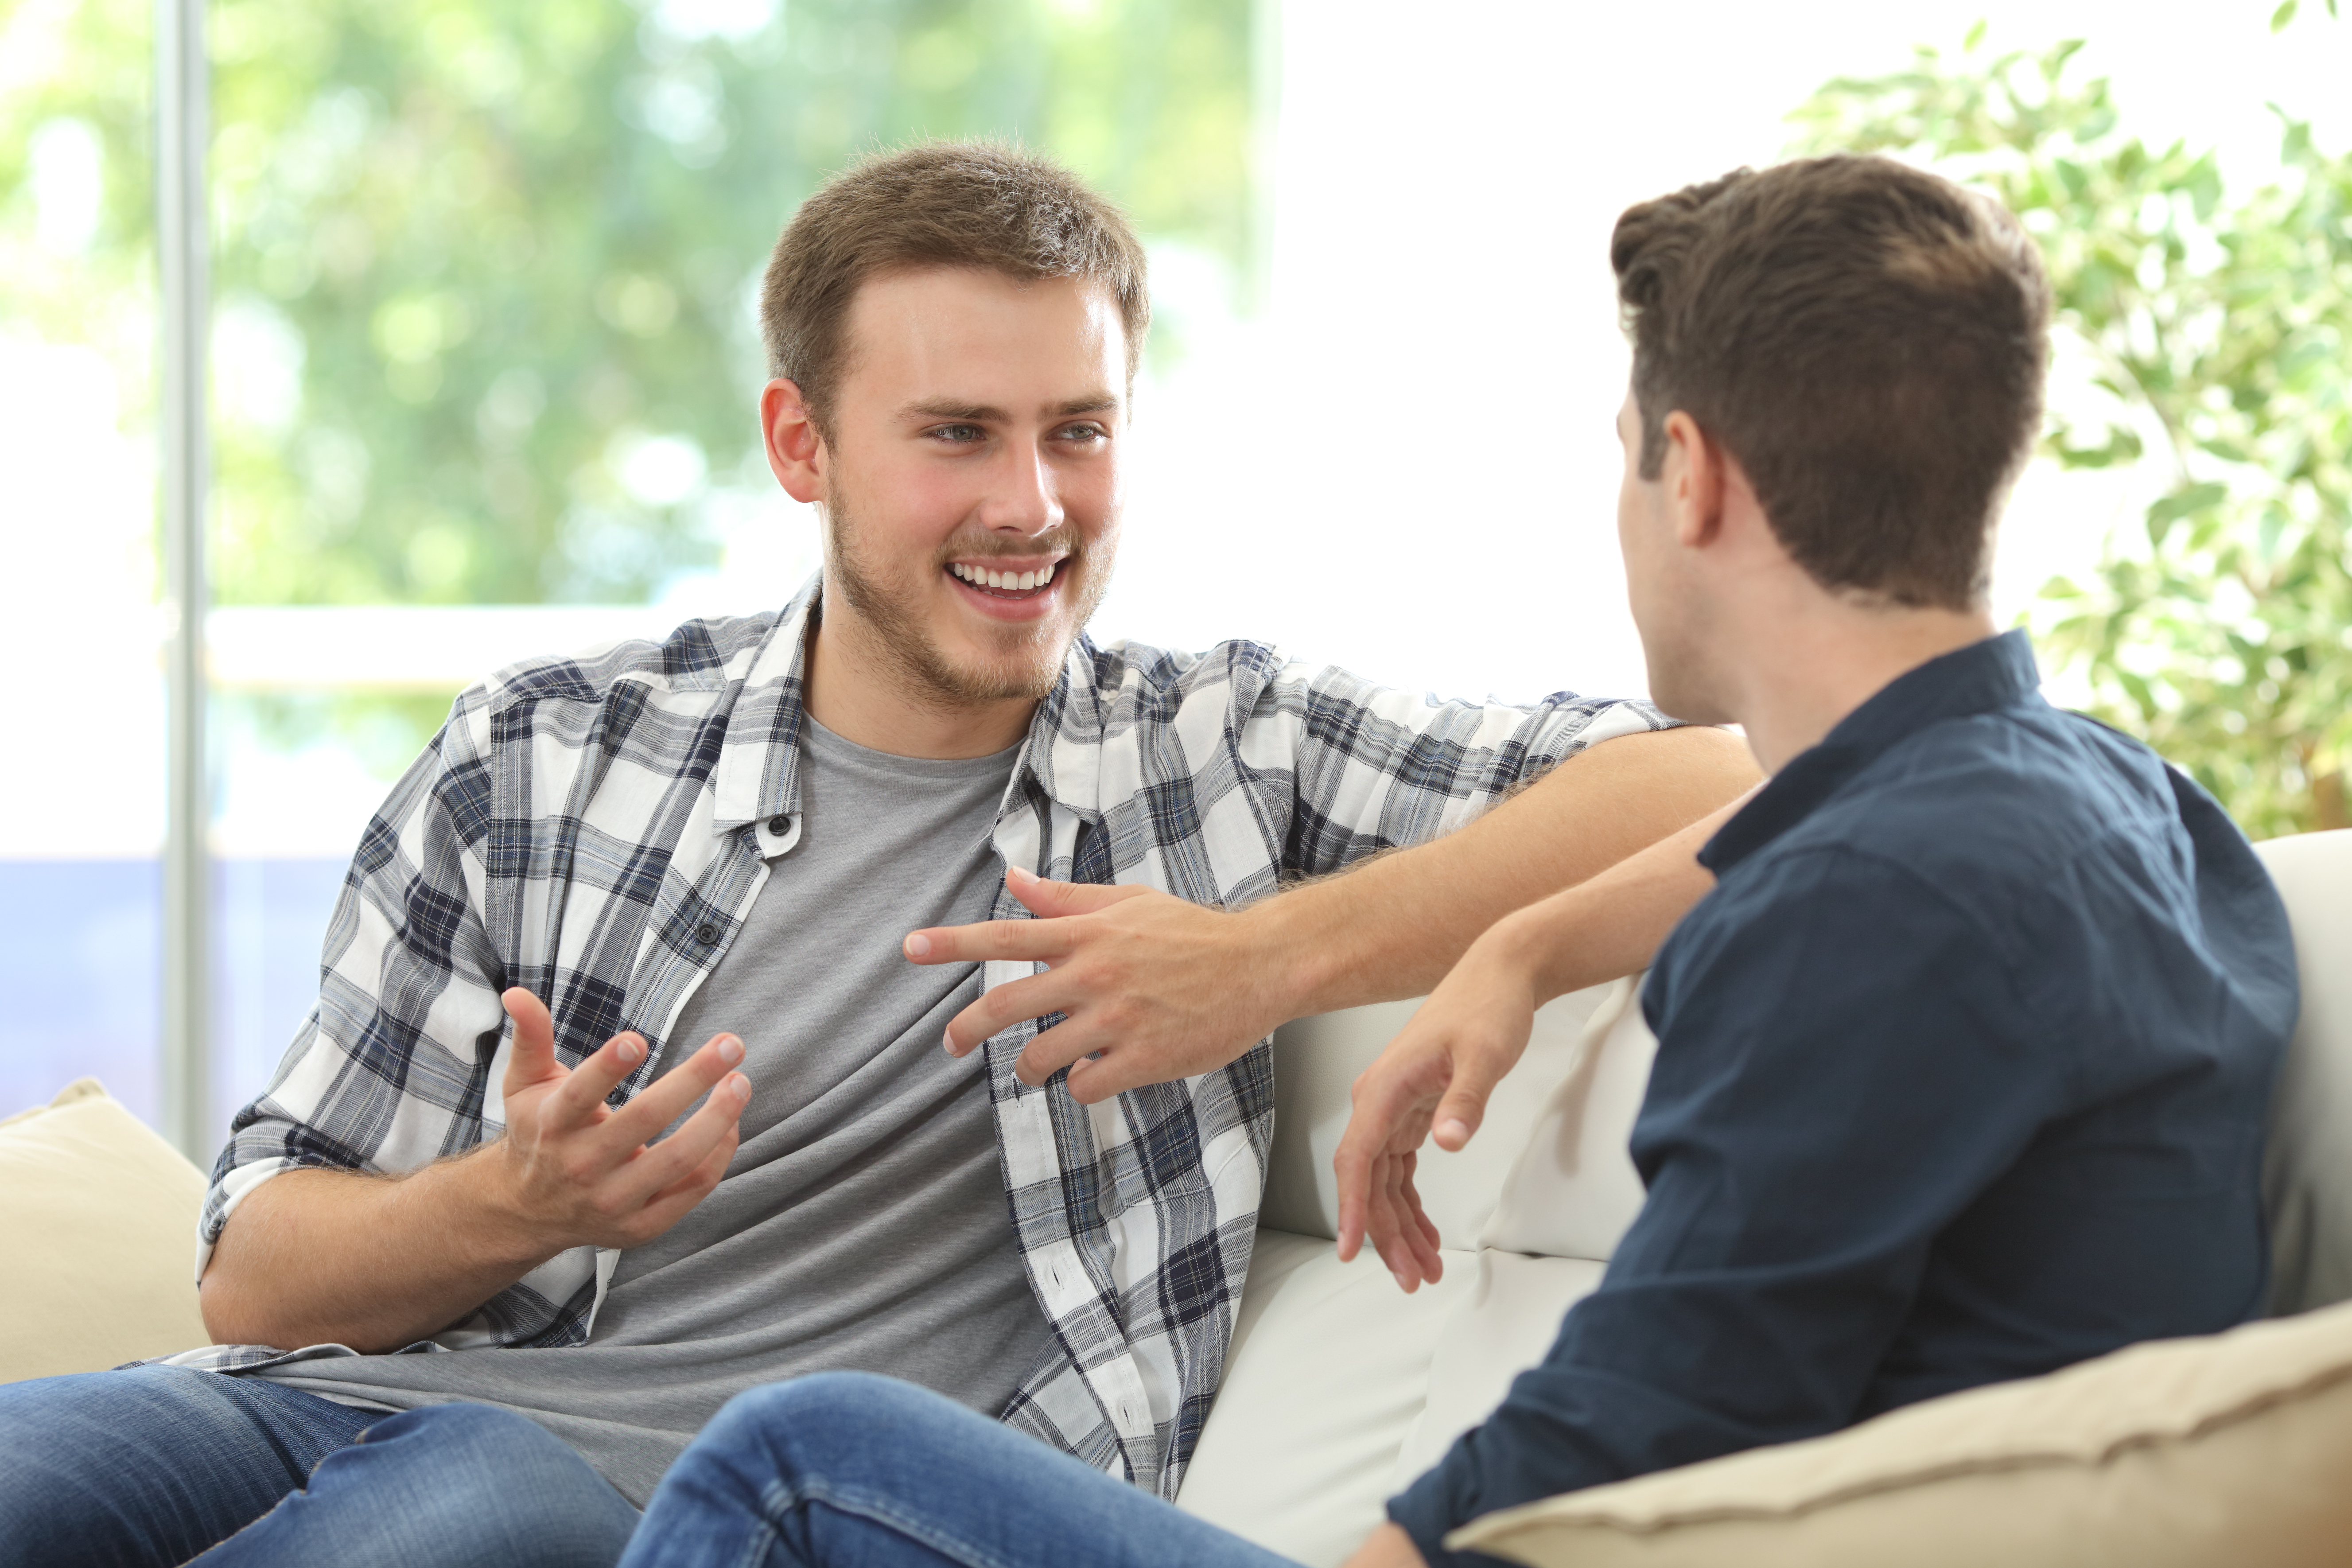 Two men talking while sitting on a couch at home | Source: Shutterstock